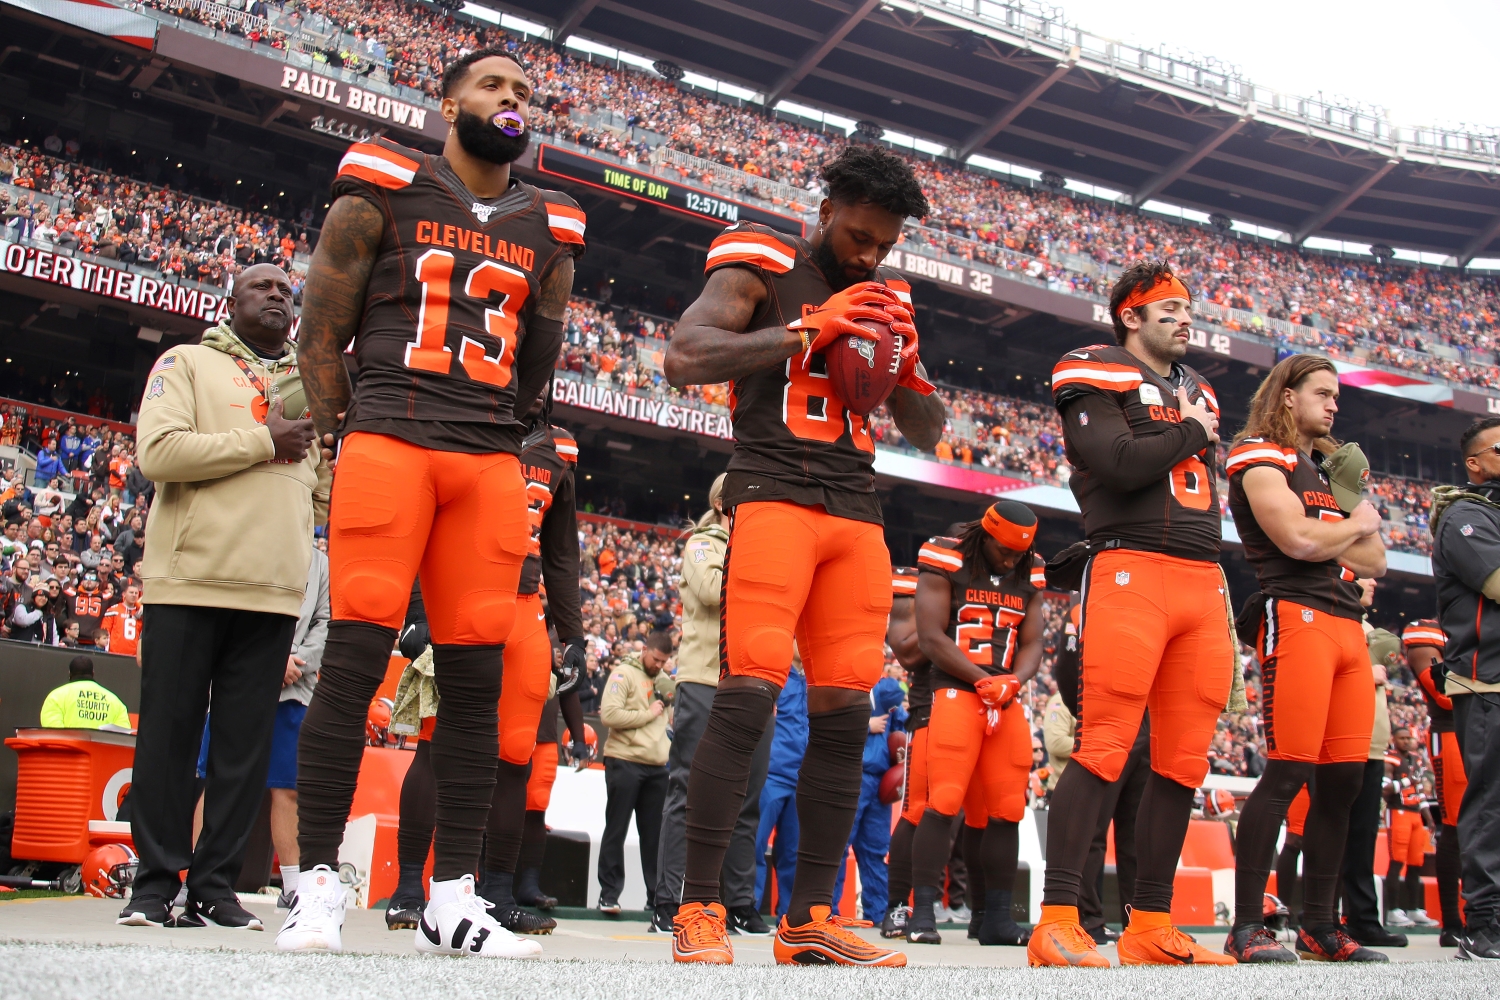 Cleveland Browns players Odell Beckham, Jarvis Landry, and Baker Mayfield stand for the National Anthem prior to a game.